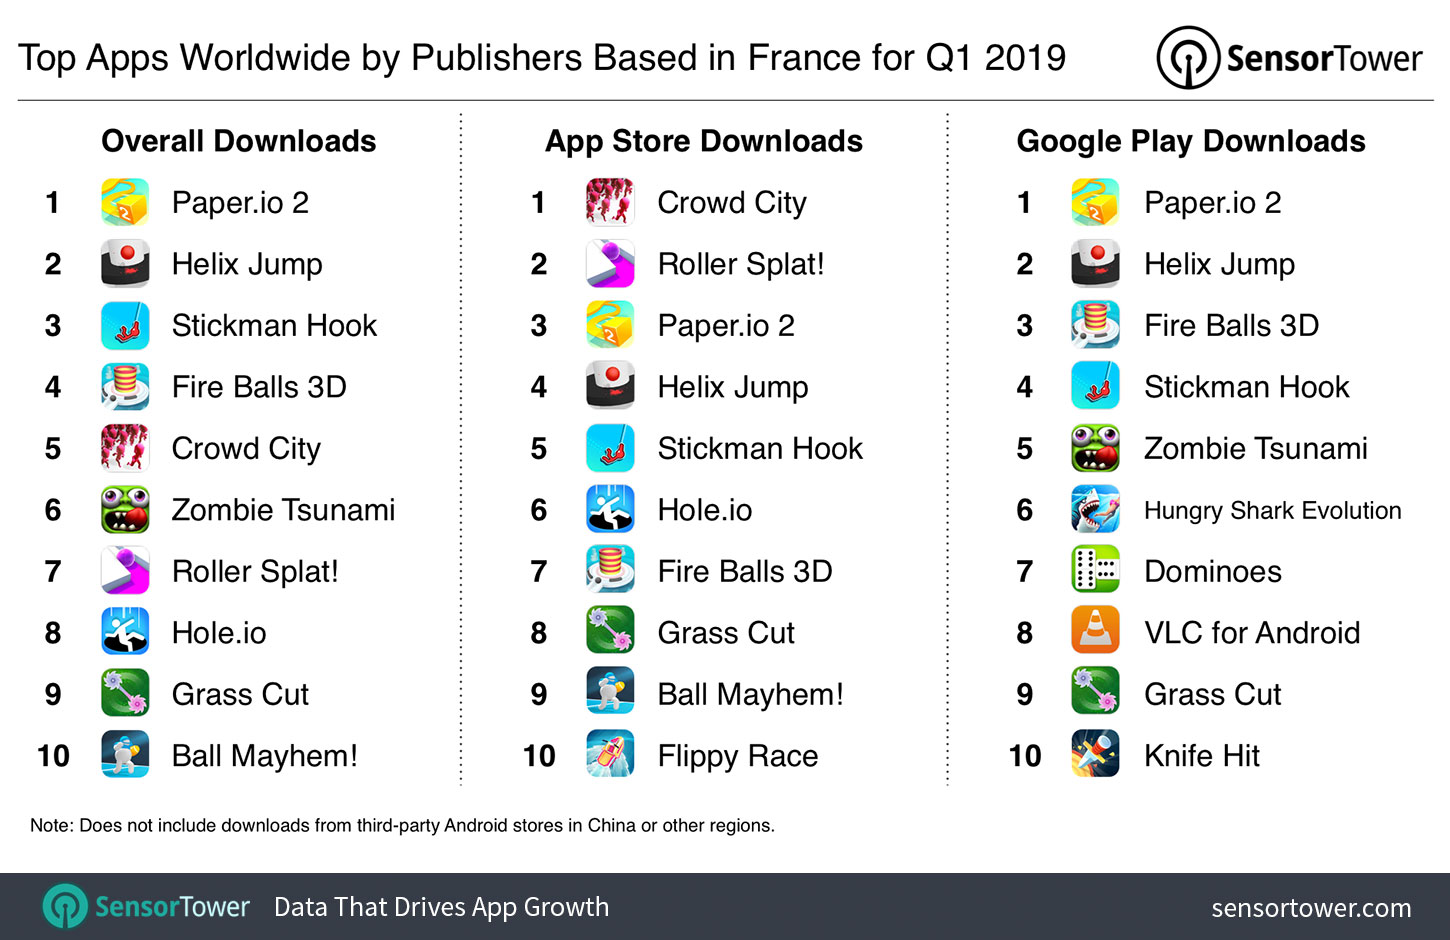 Top Apps Worldwide by Publishers based in France for Q1 2019